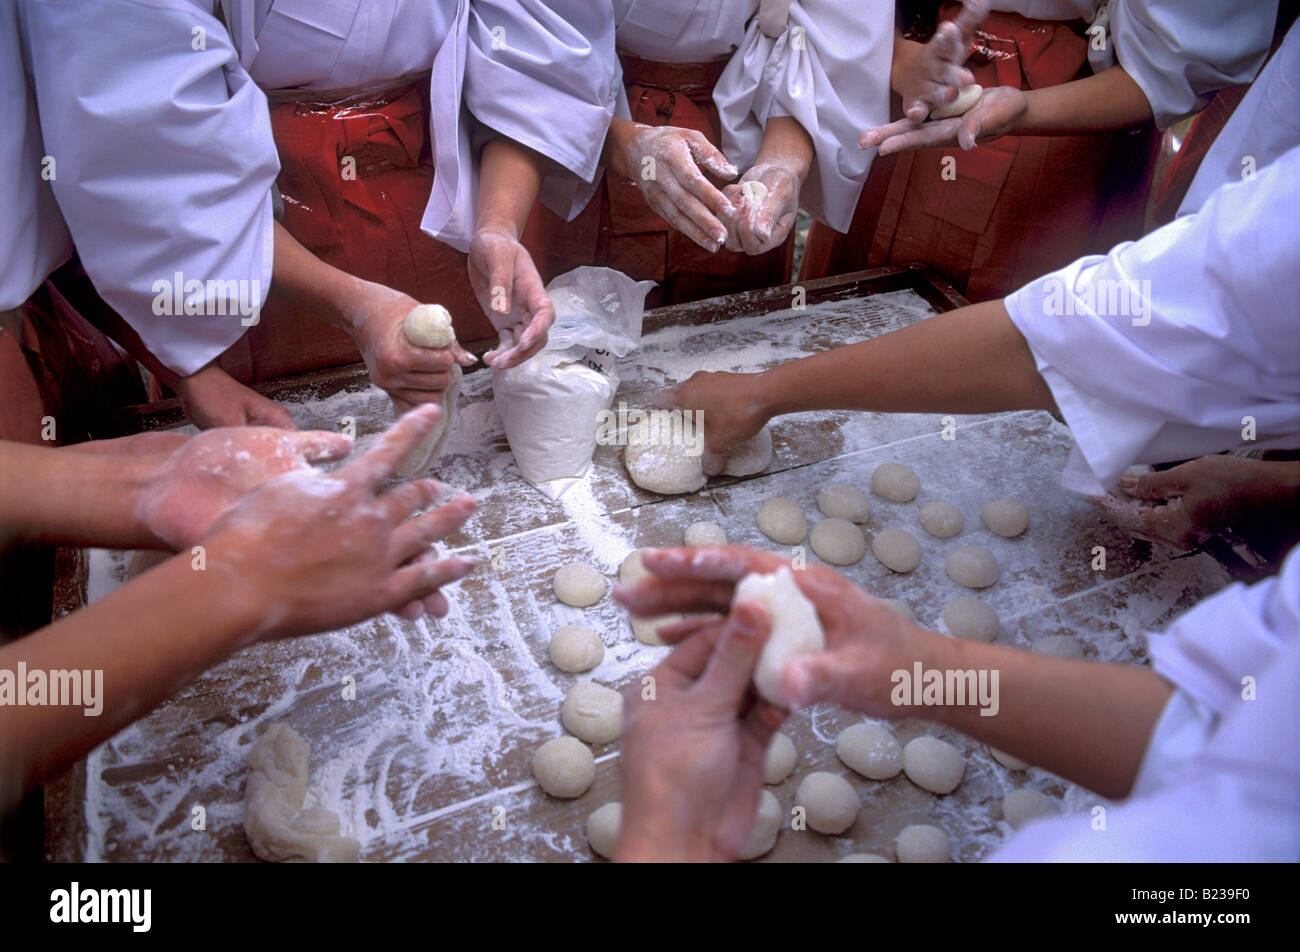 Shrine assistants called miko are making mochi balls from pounded rice paste during New Year festivities Stock Photo